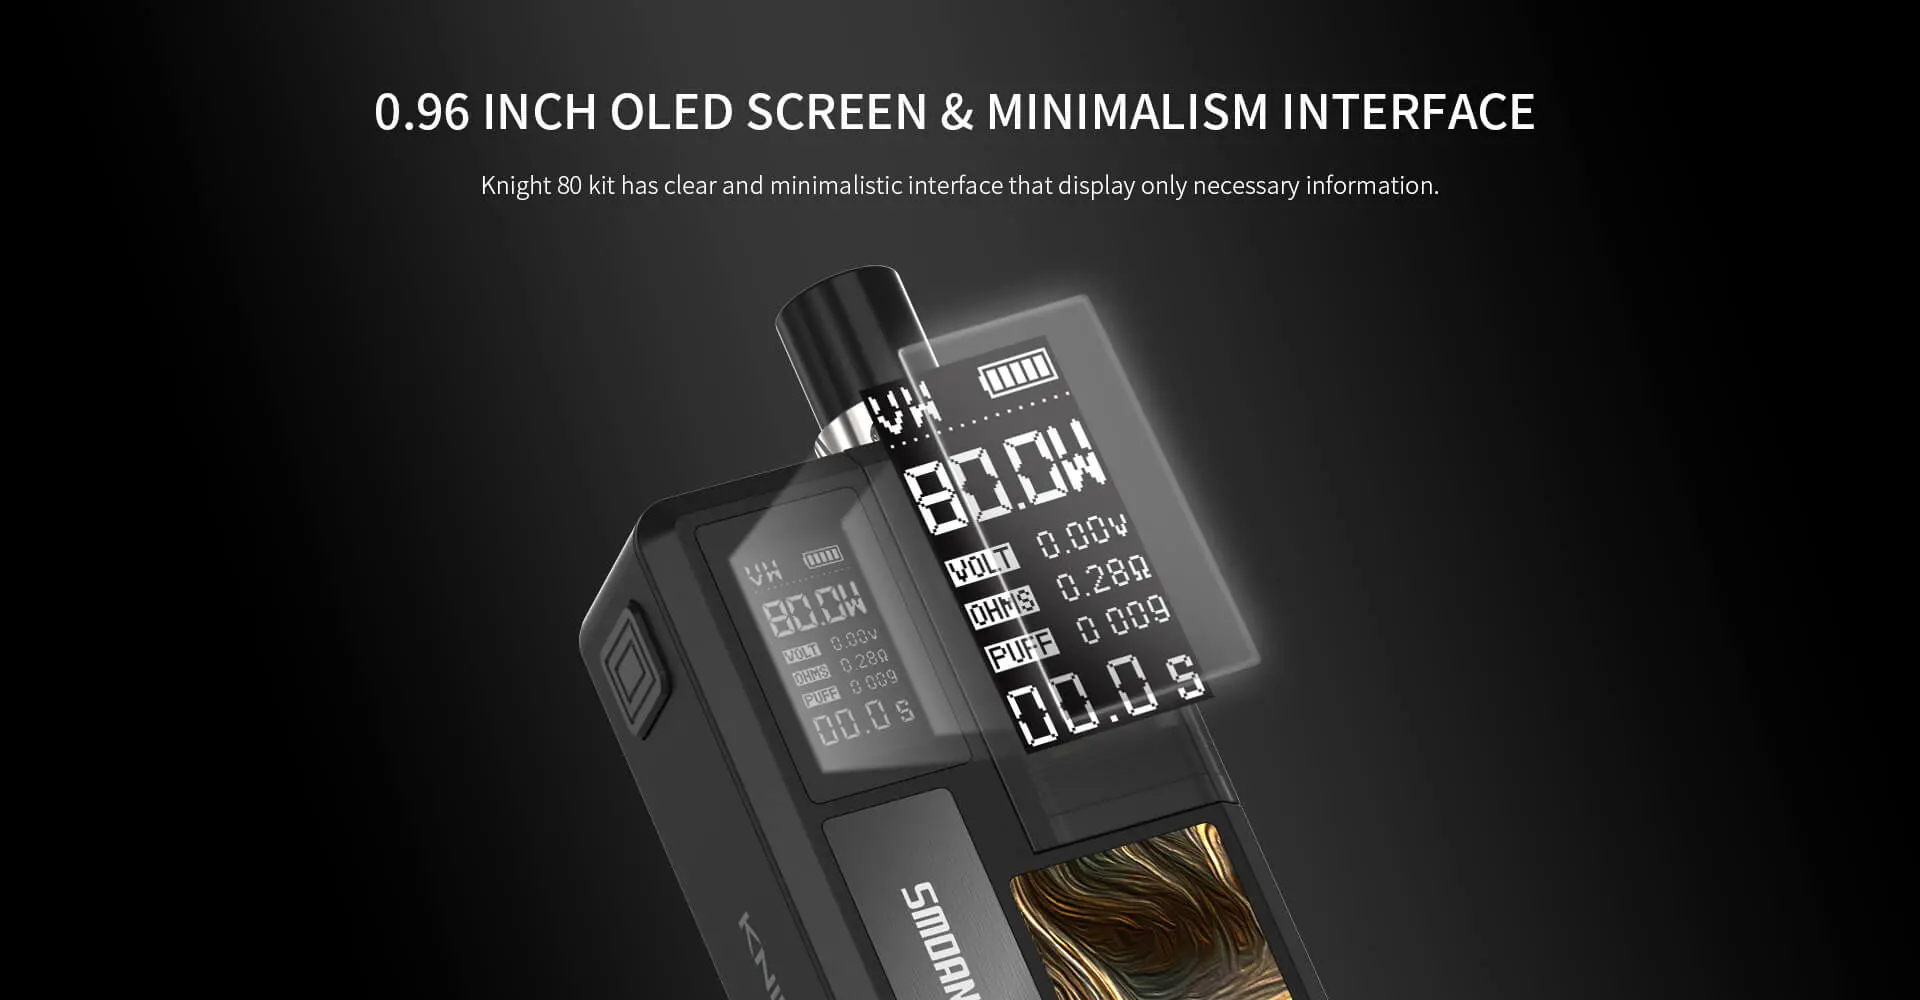 SMOANT T KNIGHT 80 0.96 INCH OLED SCREEN &MINIMALISM INTERFACE